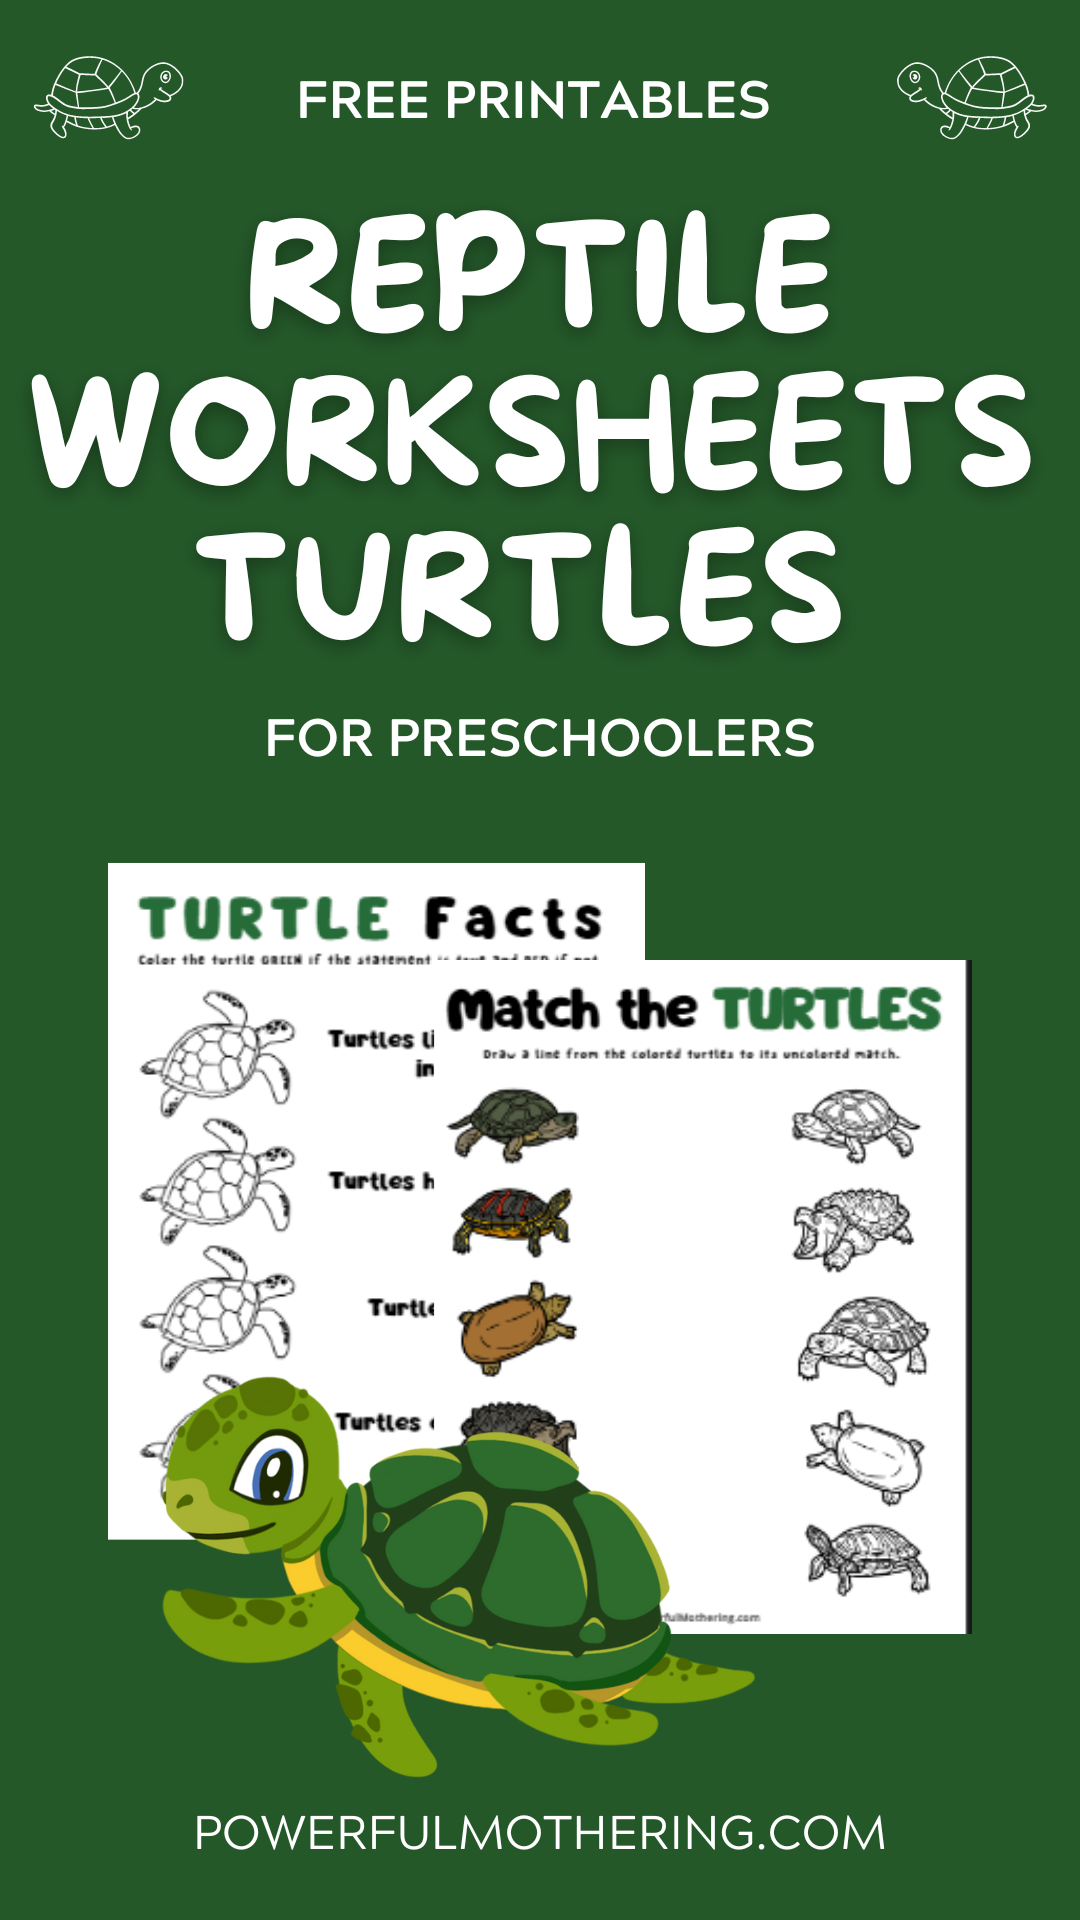 https://www.powerfulmothering.com/wp-content/uploads/2023/03/Reptile-Worksheets-Turtles-1.png